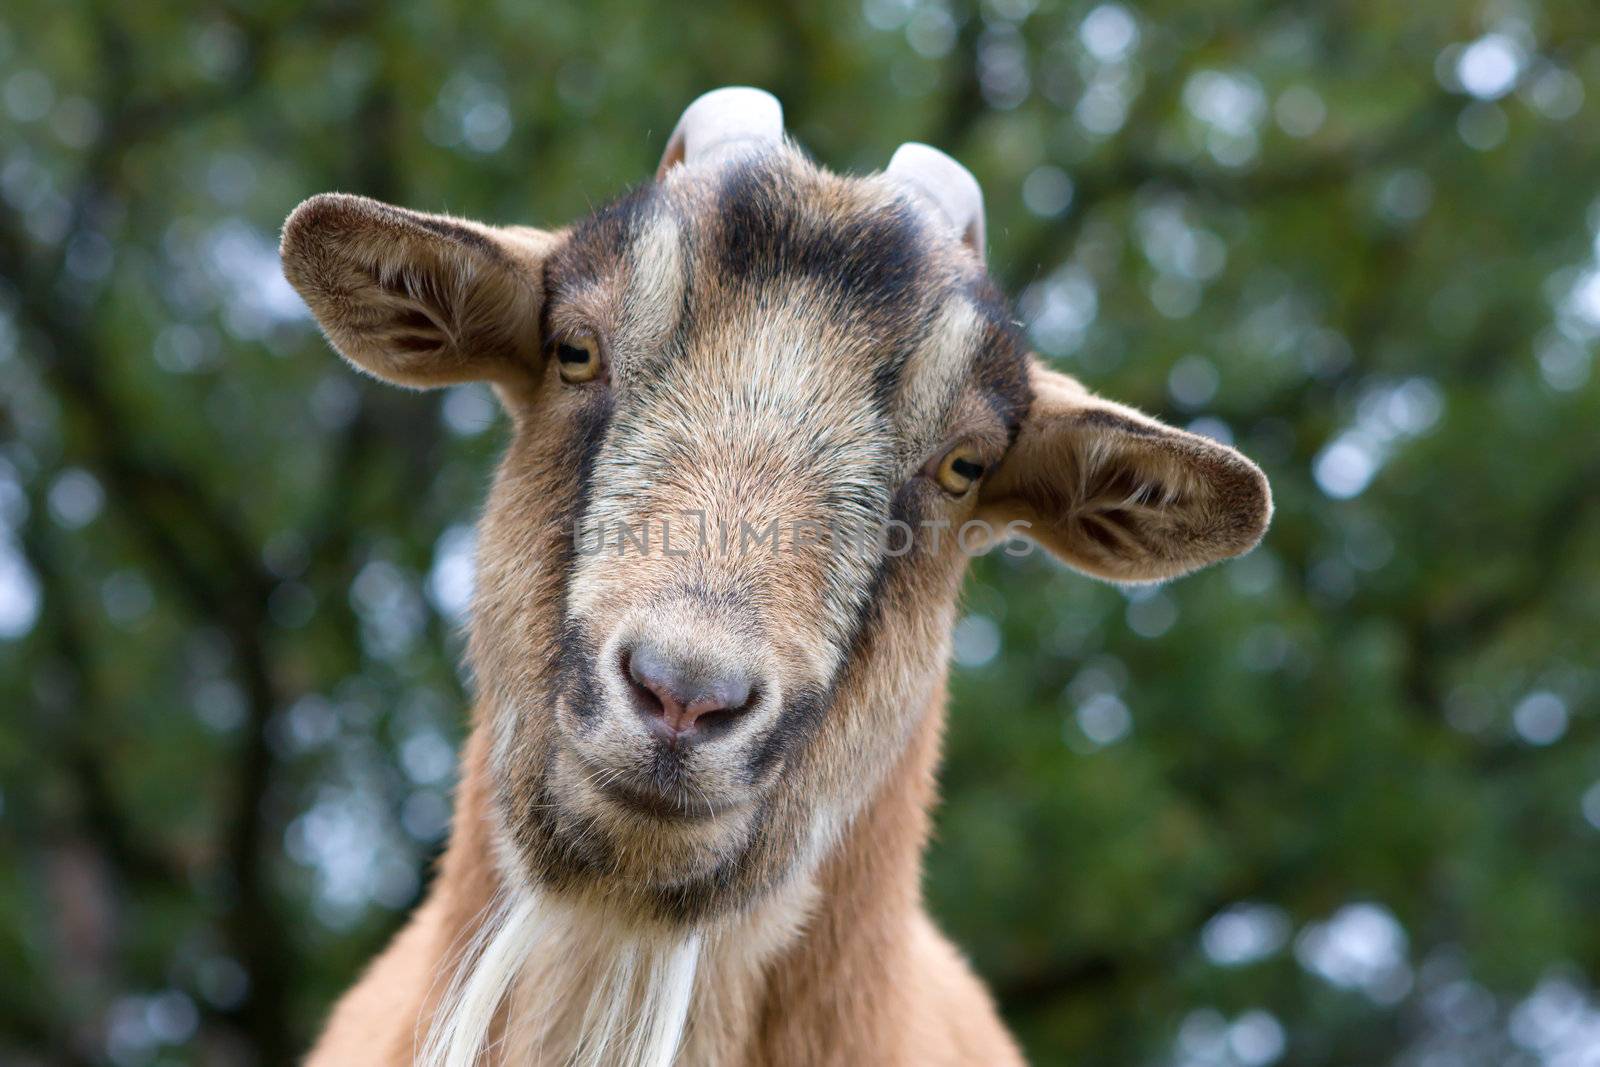 Close up of a curious Billy Goat.